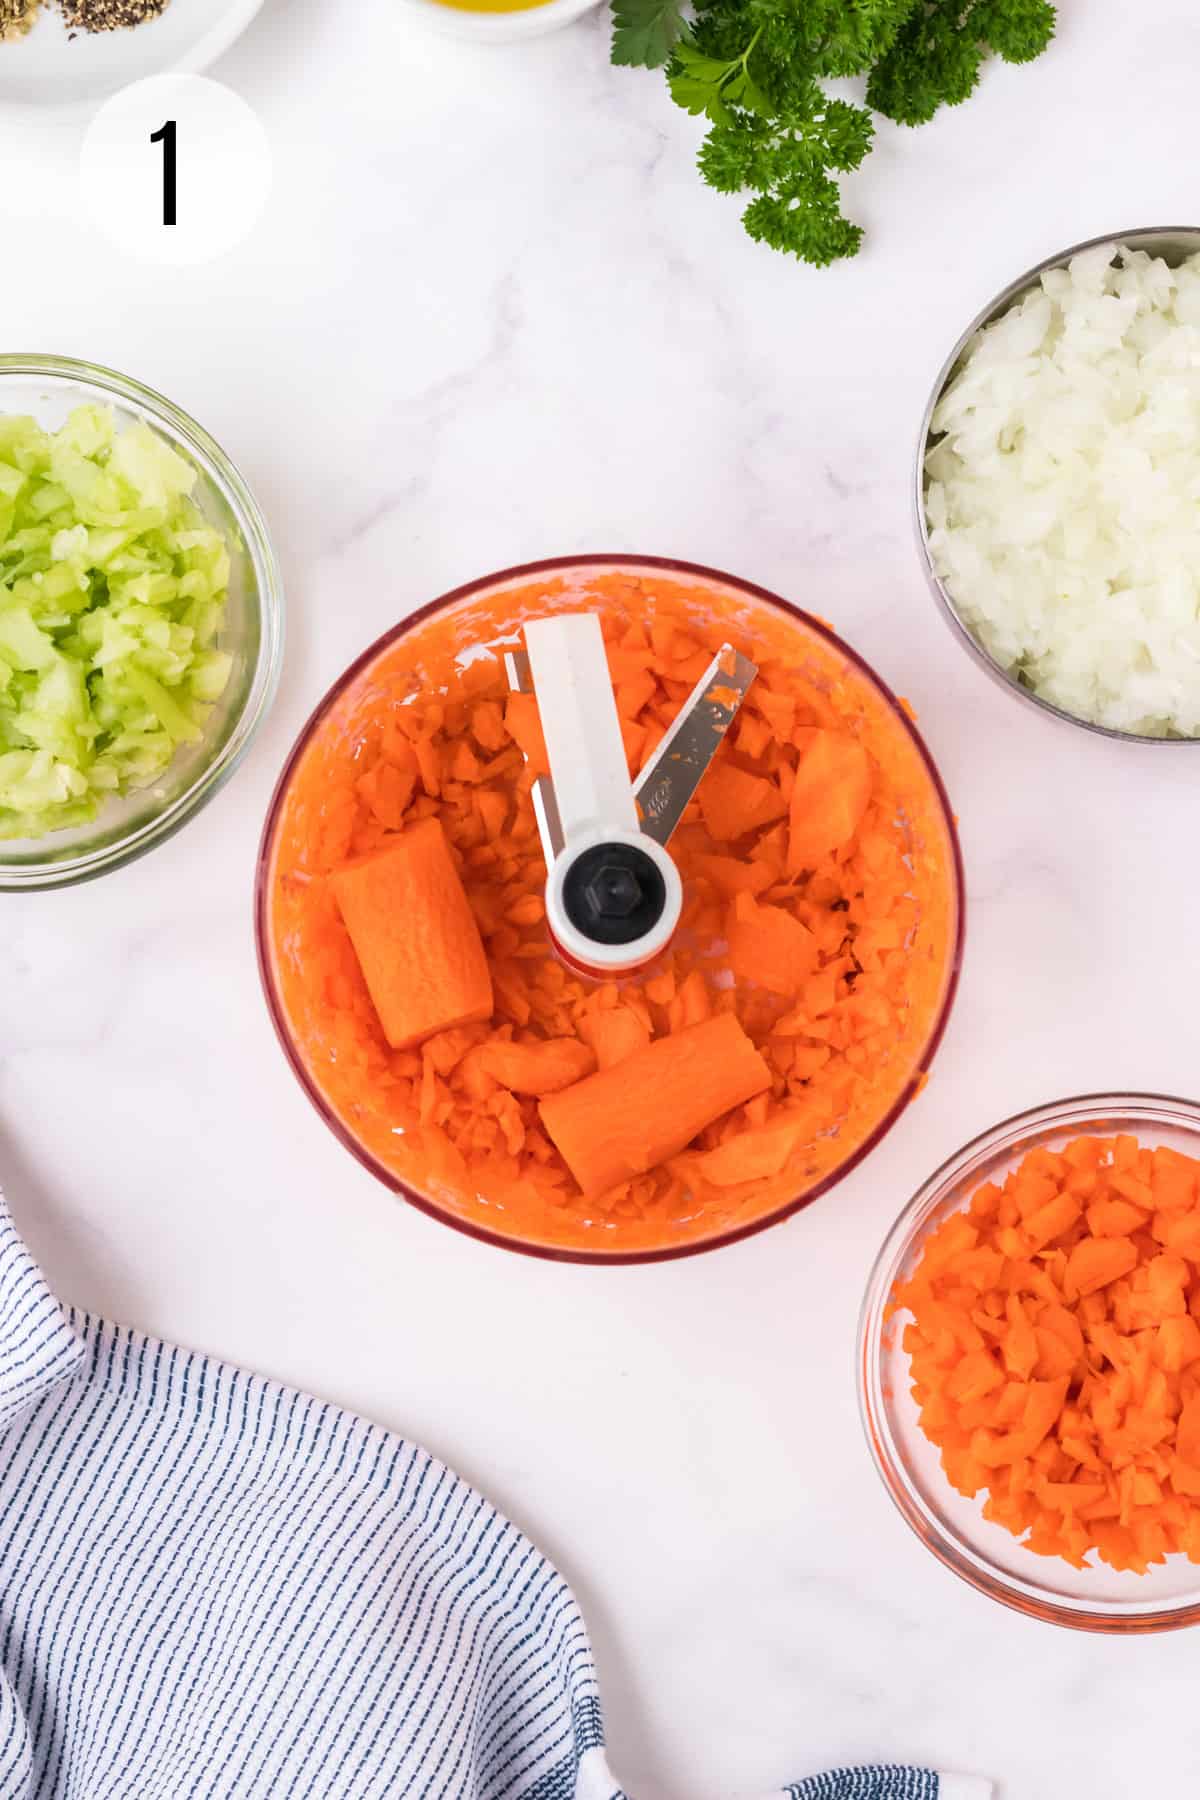 Handheld food chopper with chopped carrots and bowls of chopped celery, onions and more carrots around with blue & white towel in lower left. 